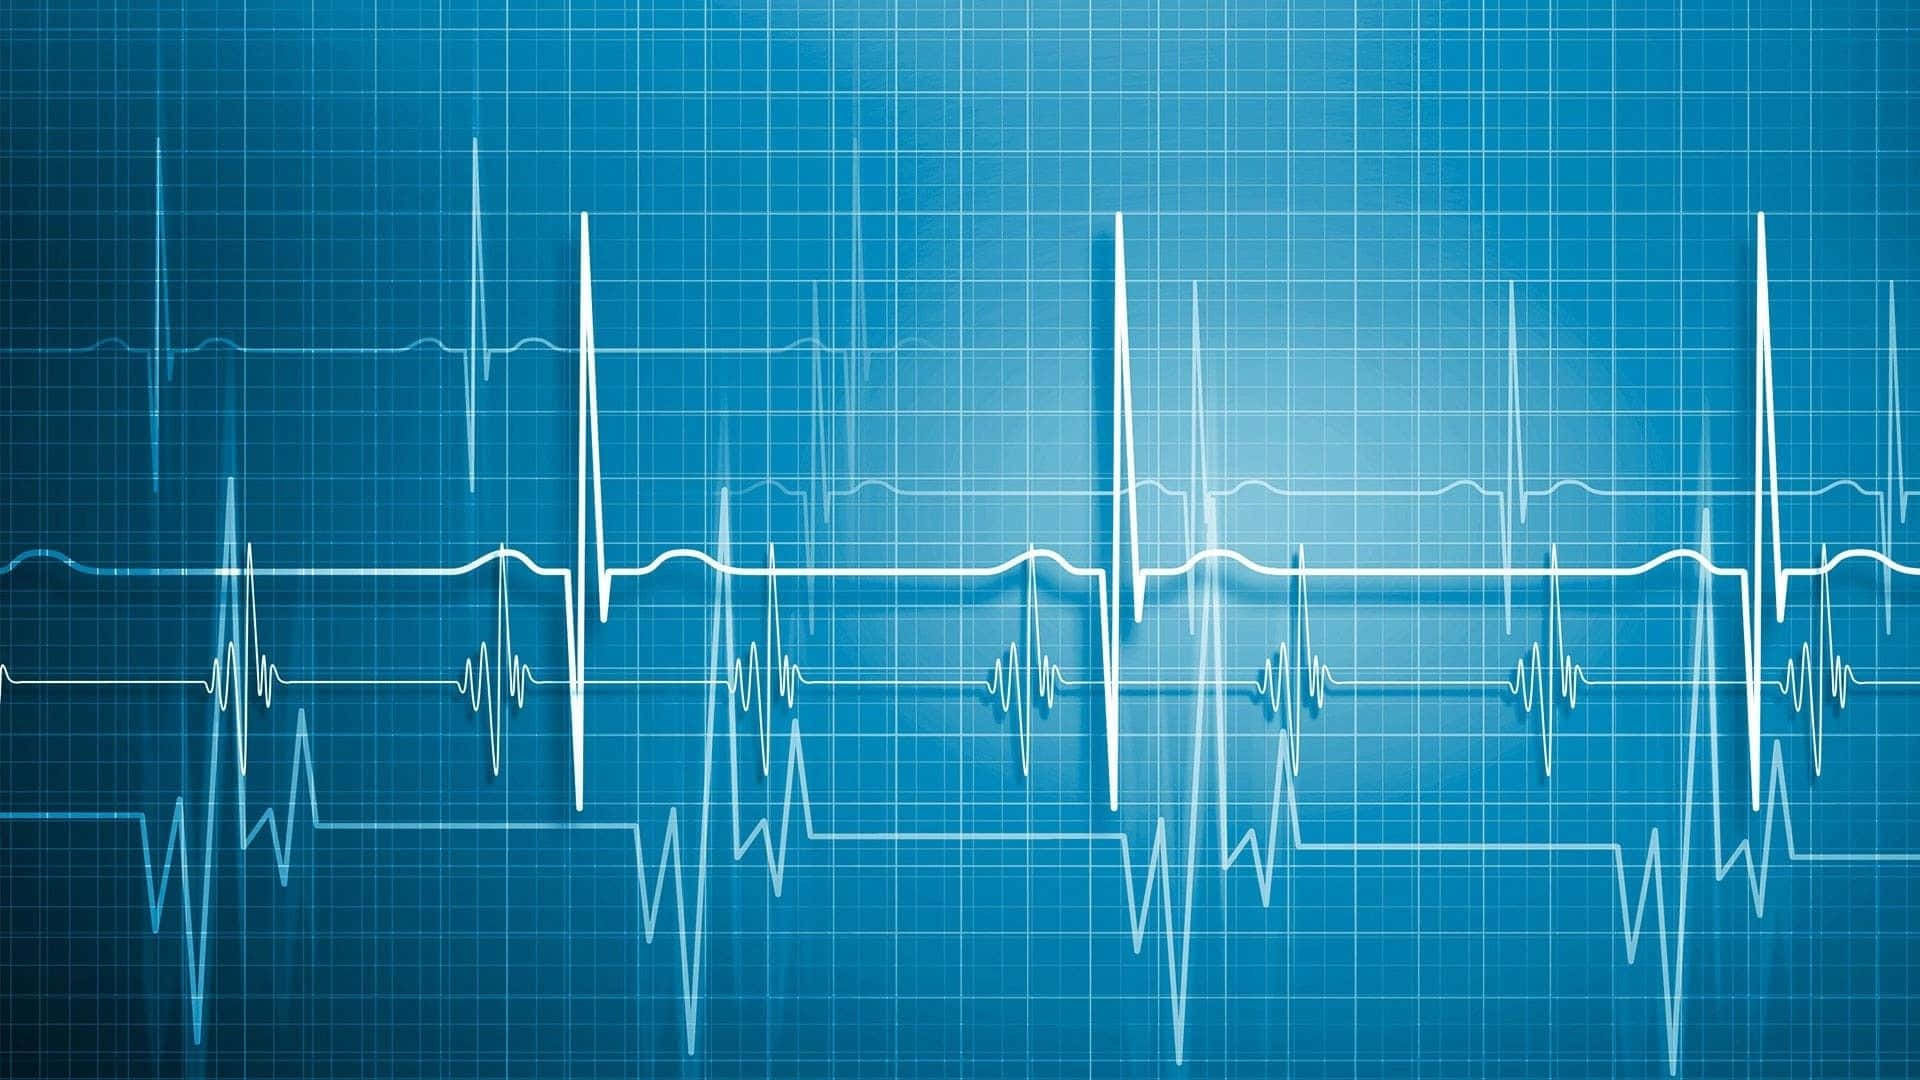 Display of Heartbeat Rate in High Definition Wallpaper